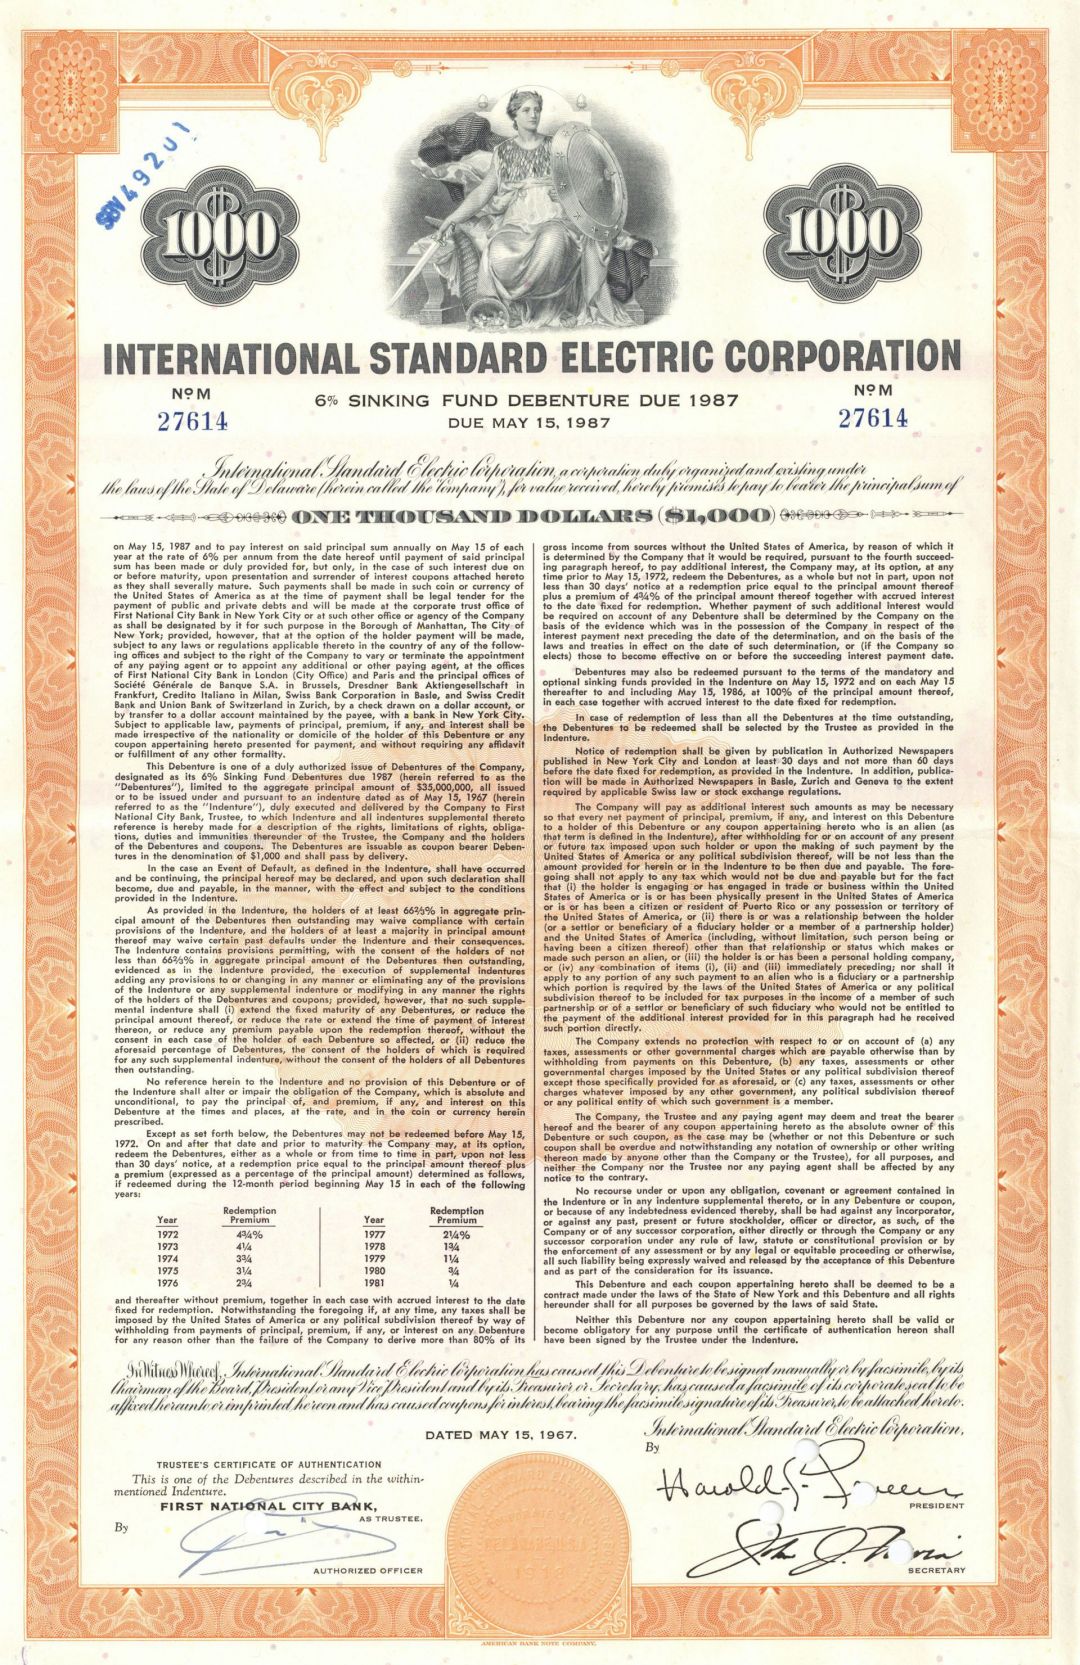 International Standard Electric Corporation - $1,000 6% Sinking Fund Bond - Connections with NEC Corporation